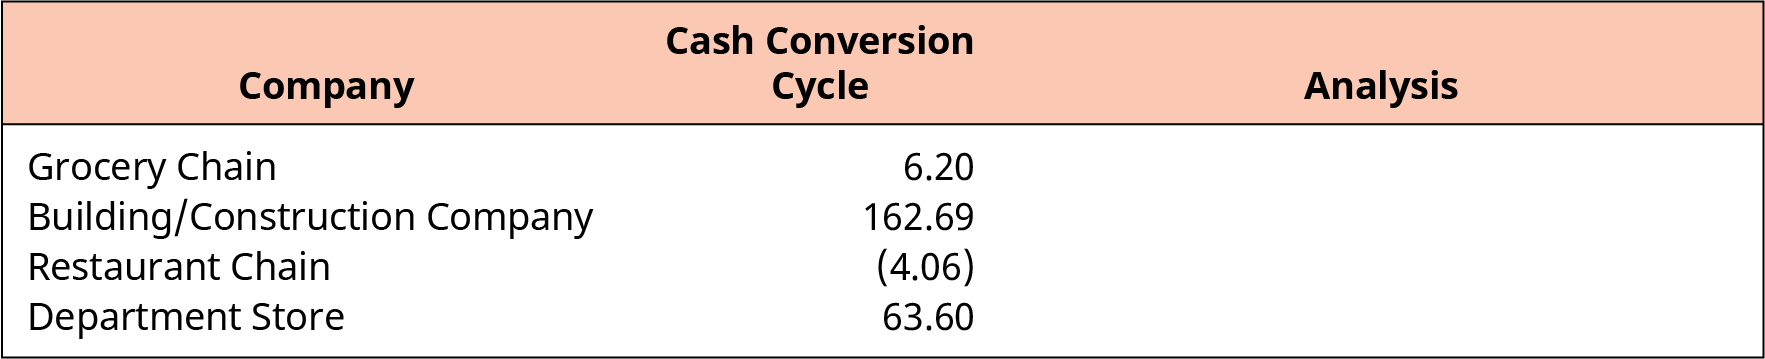 A table shows the types of companies and their cash conversion cycles. The Grocery chain has a cash conversion cycle of 6.20. The building/construction company has a cash conversion cycle of 162.69. The restaurant chain has a cash conversion cycle of 4.06. The department store has a cash conversion cycle of 63.60. There is a blank space to fill in the analysis of the cash conversion cycles based on the information given.